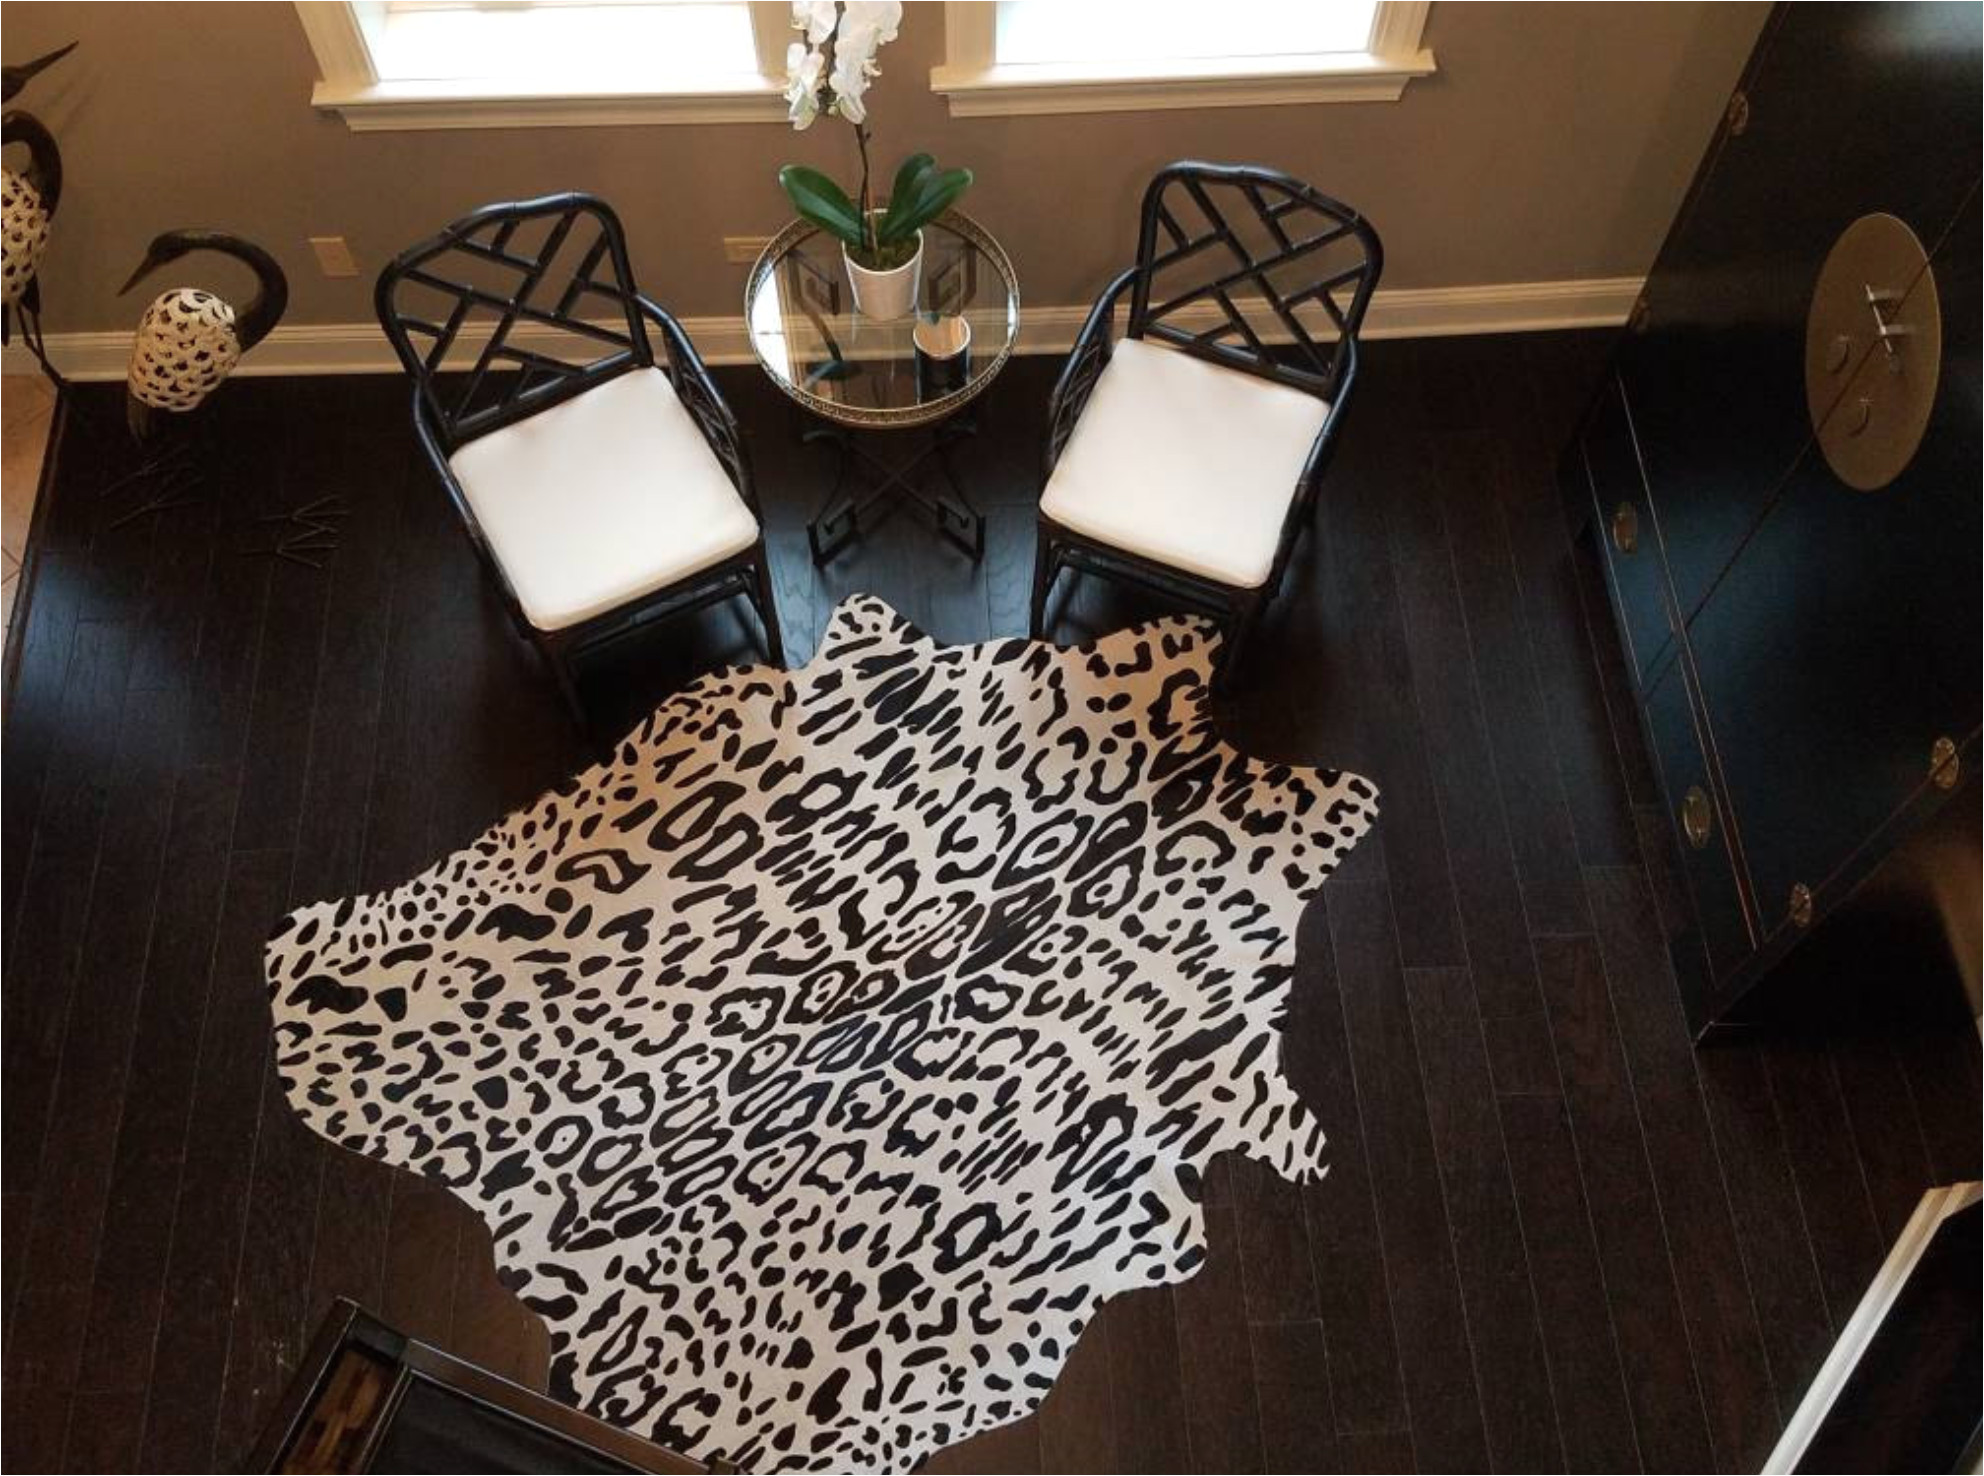 Who Sells Cowhide Rugs Near Me Jaguar Print Cowhide Another Happy Customer Sharing Photos with